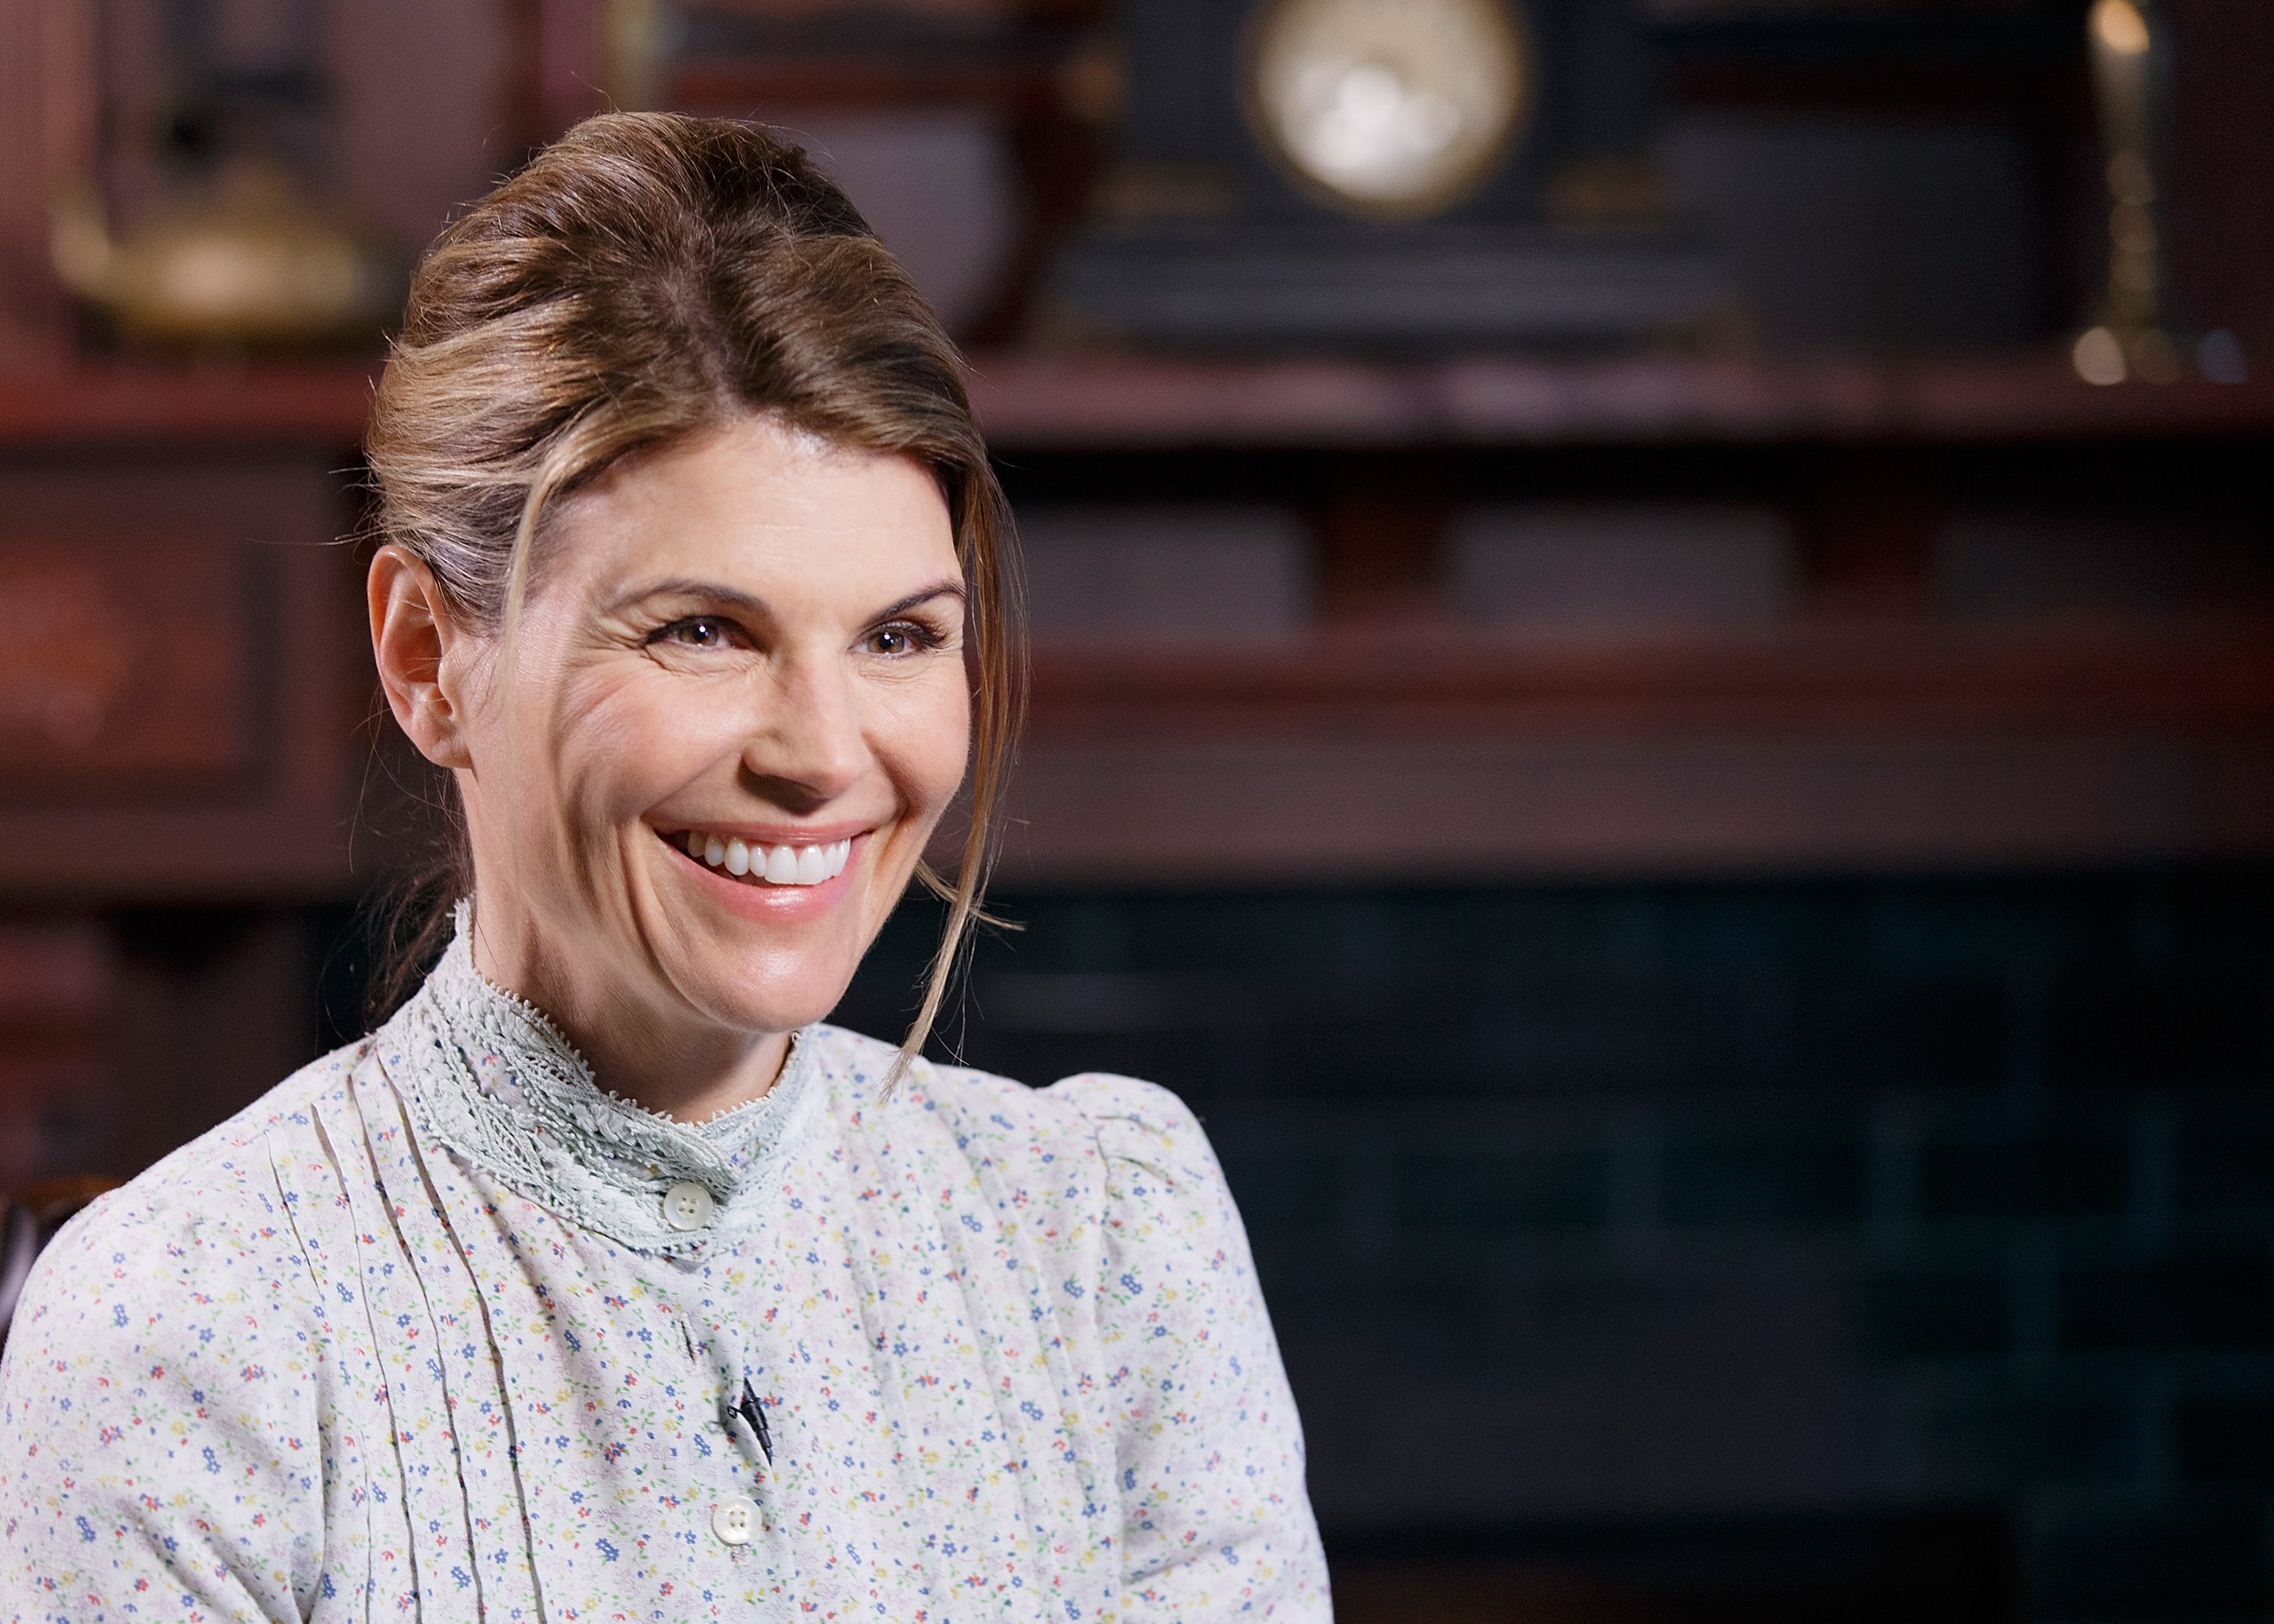 Actress Lori Loughlin on the set of "When Calls the Heart" | Source: Getty Images